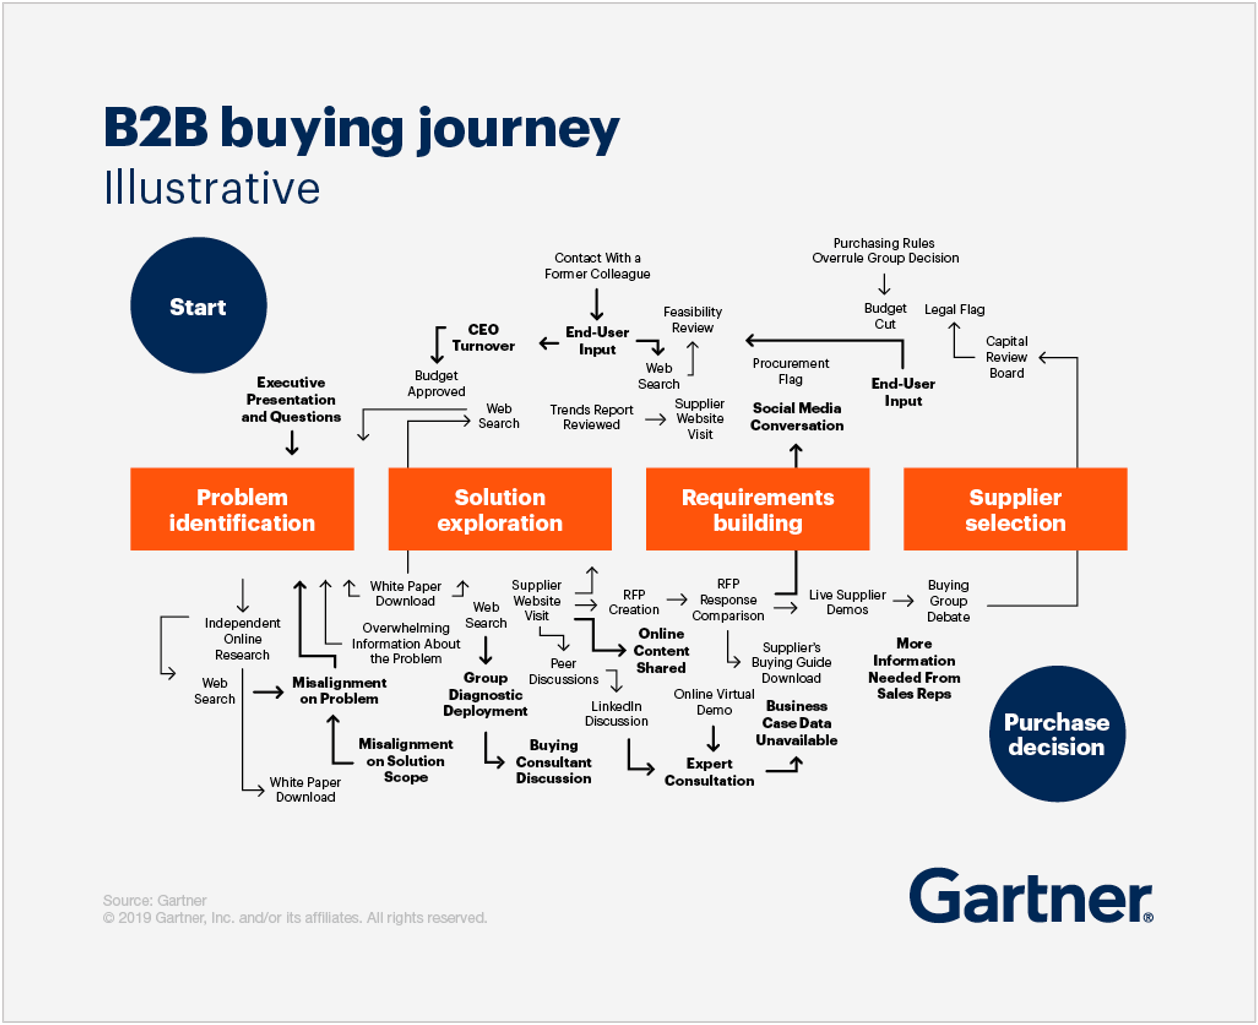 A modern nonlinear B2B buyer’s journey from start to purchase decision, as illustrated by Gartner